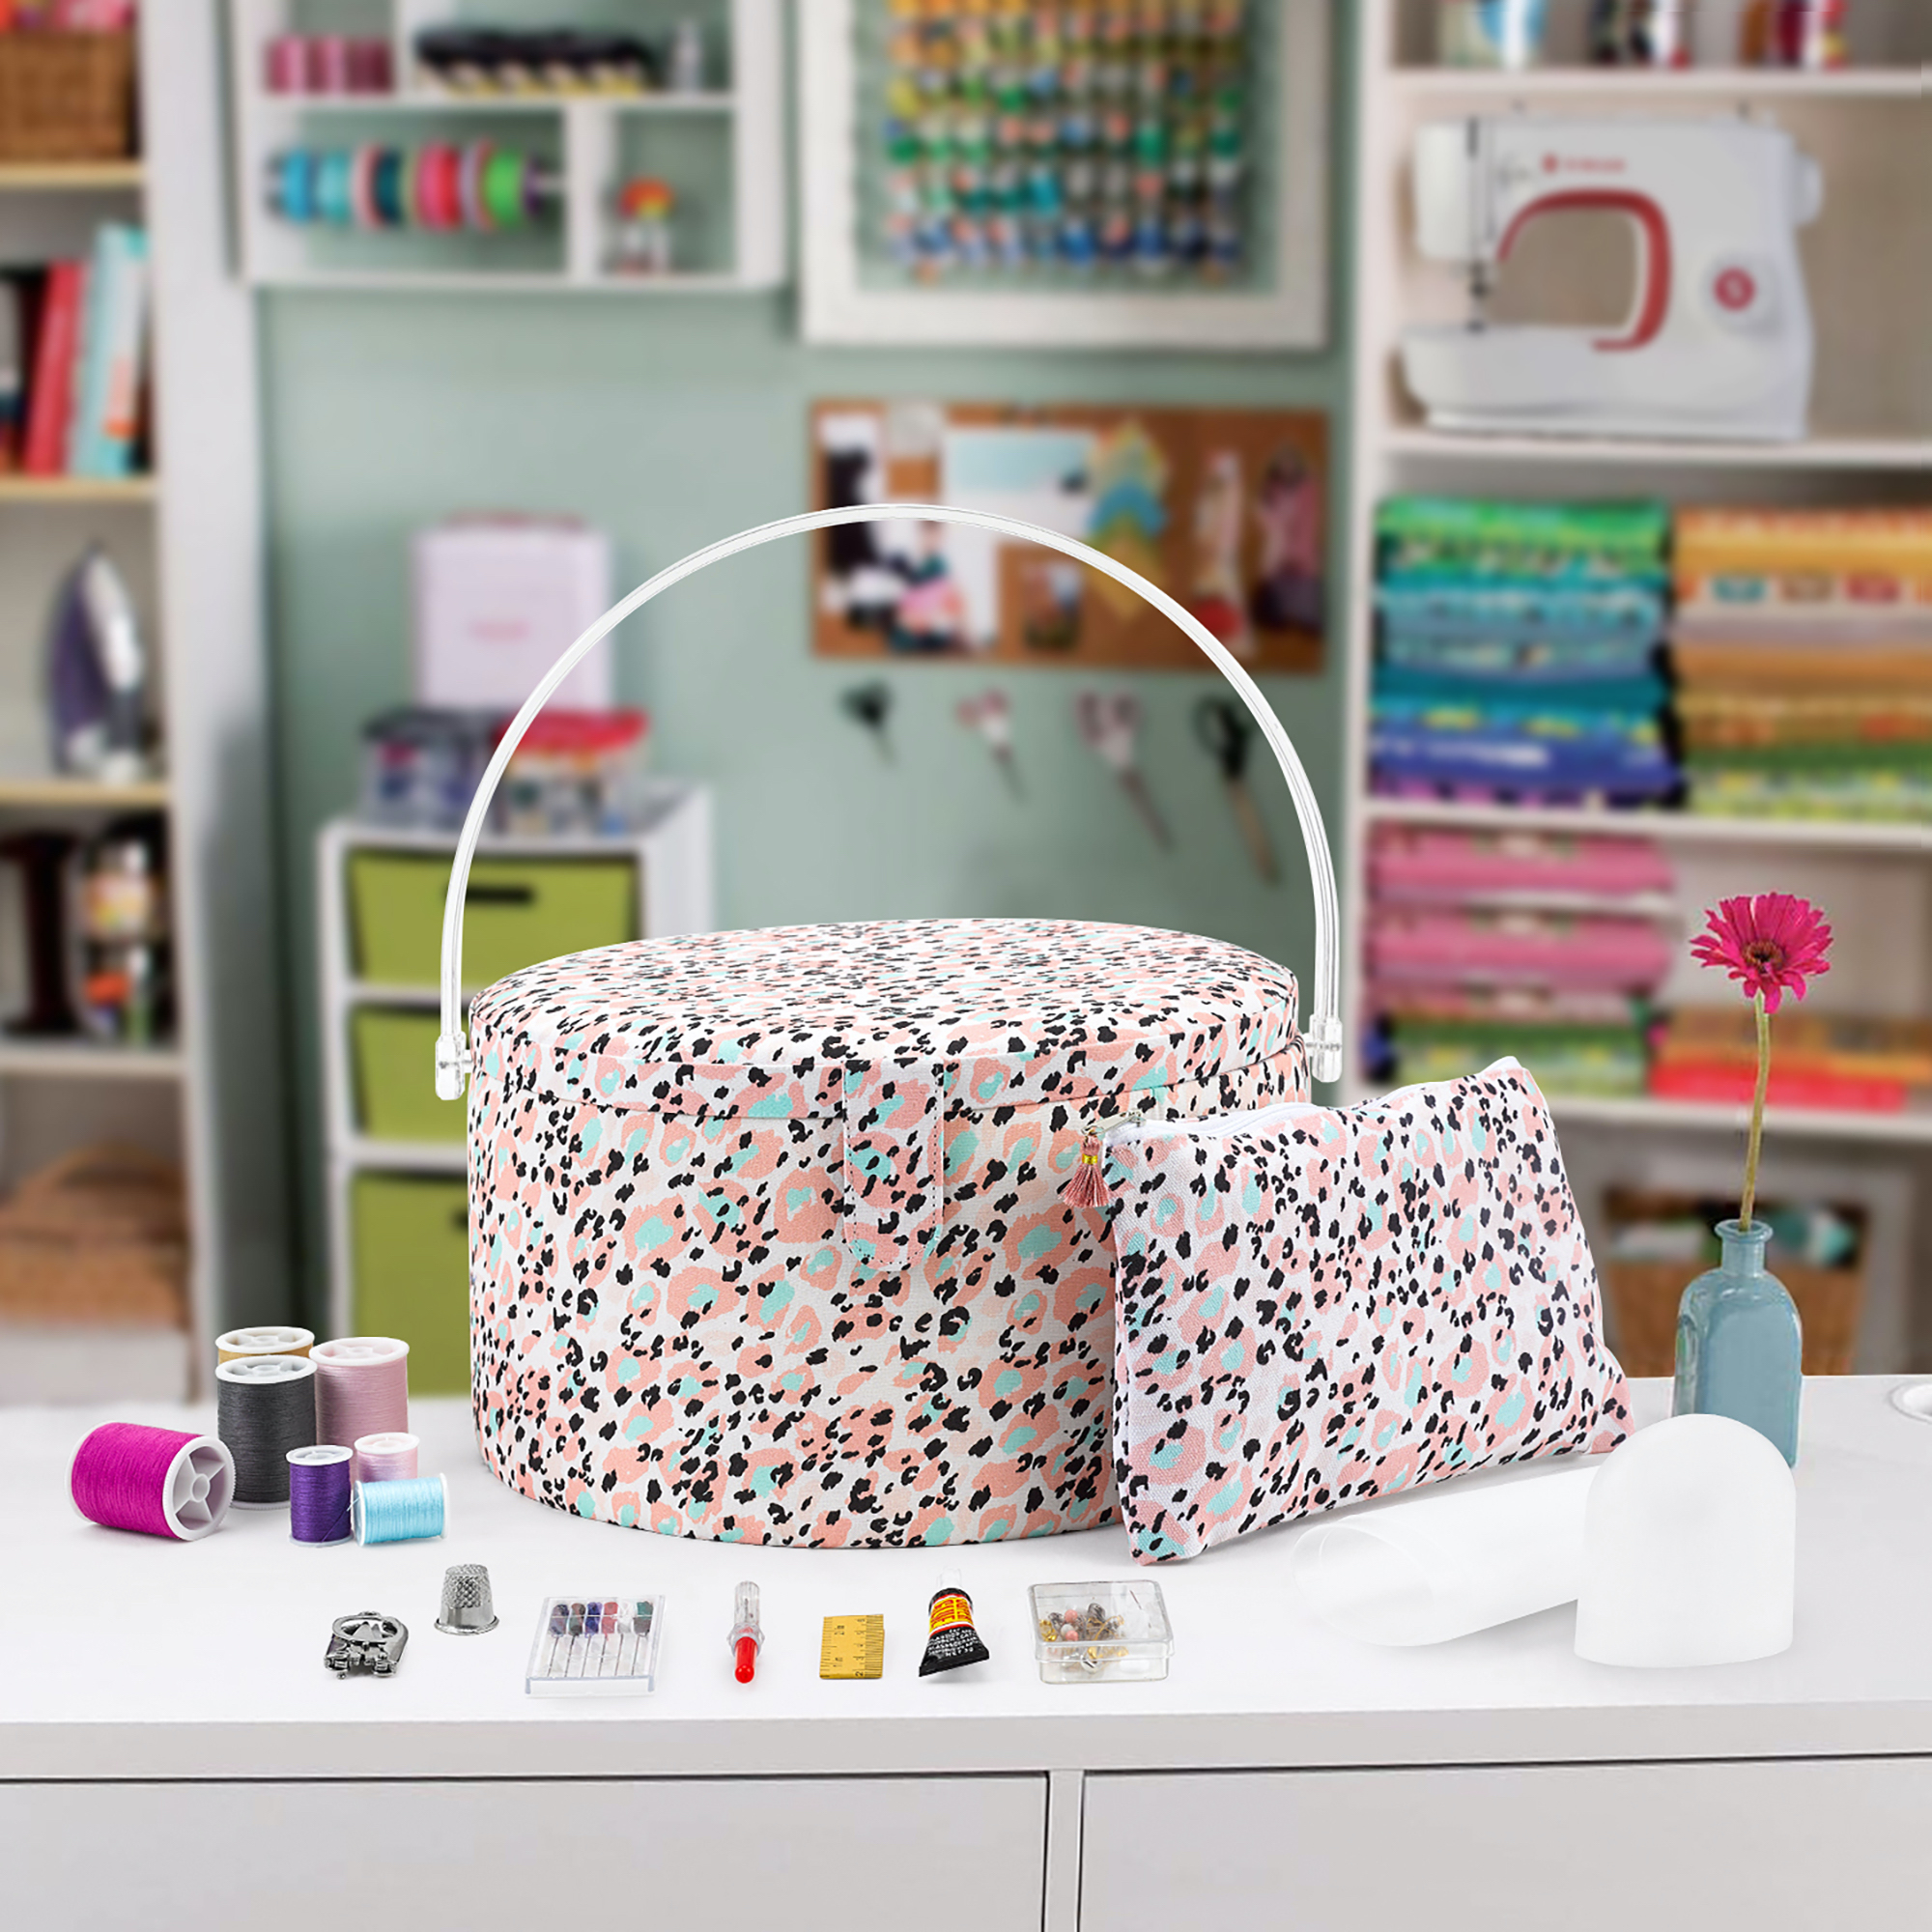 Singer Sew - It - Goes Stackable Storage Case